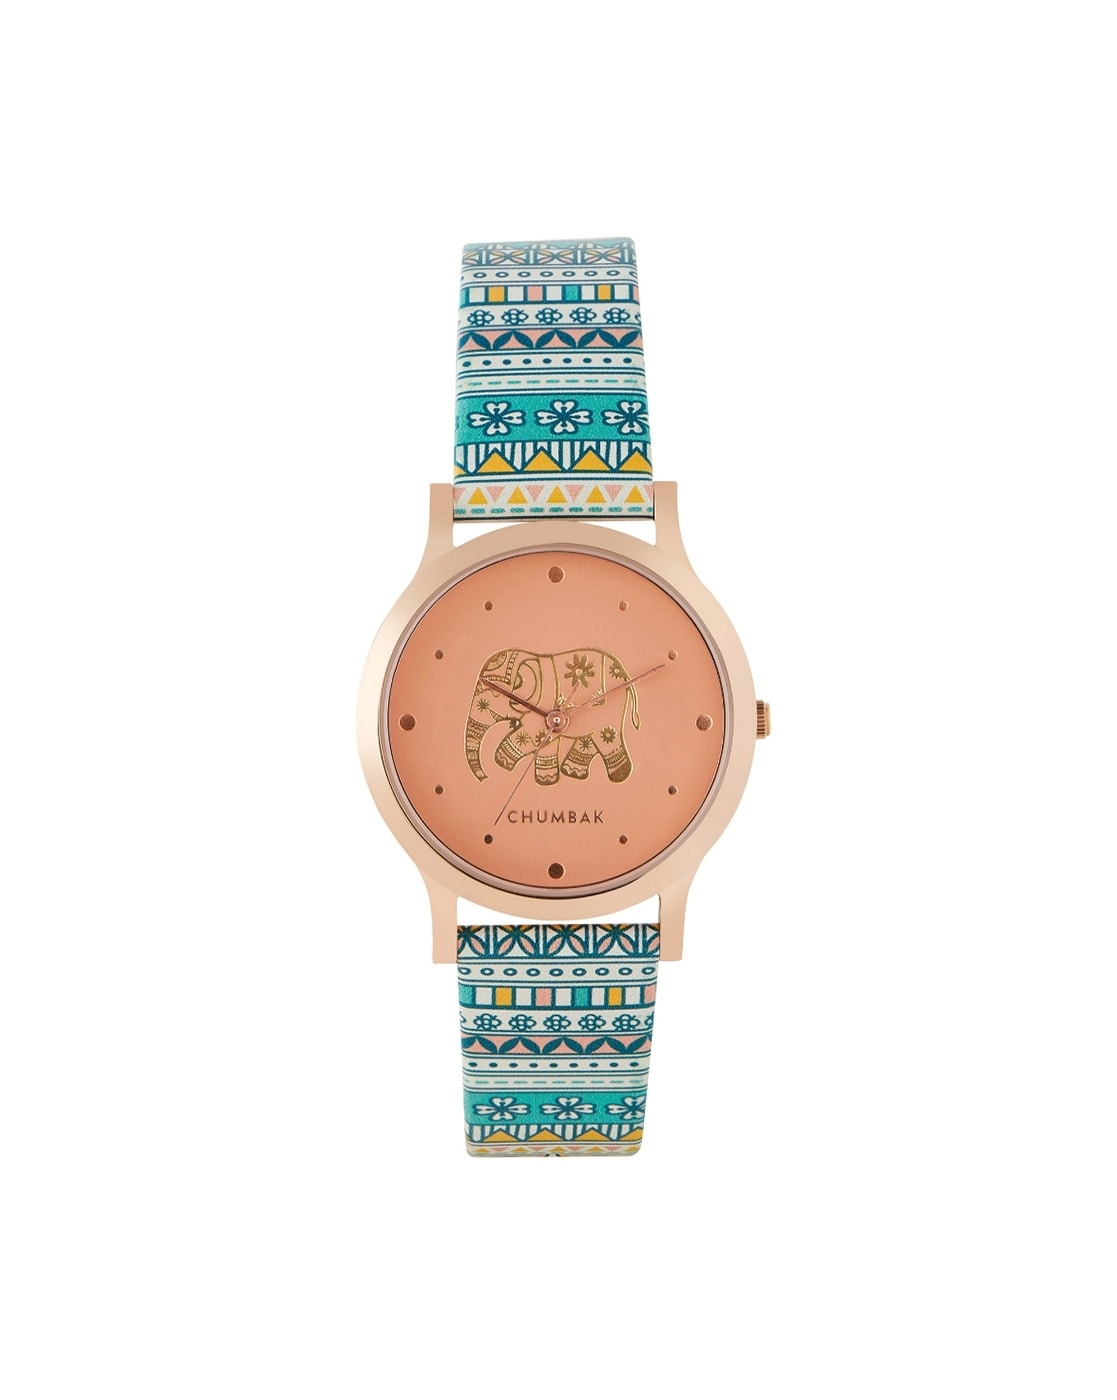 Teal By Chumbak Rose Garden Analog Watch - For Women - Buy Teal By Chumbak  Rose Garden Analog Watch - For Women LV7 Online at Best Prices in India |  Flipkart.com